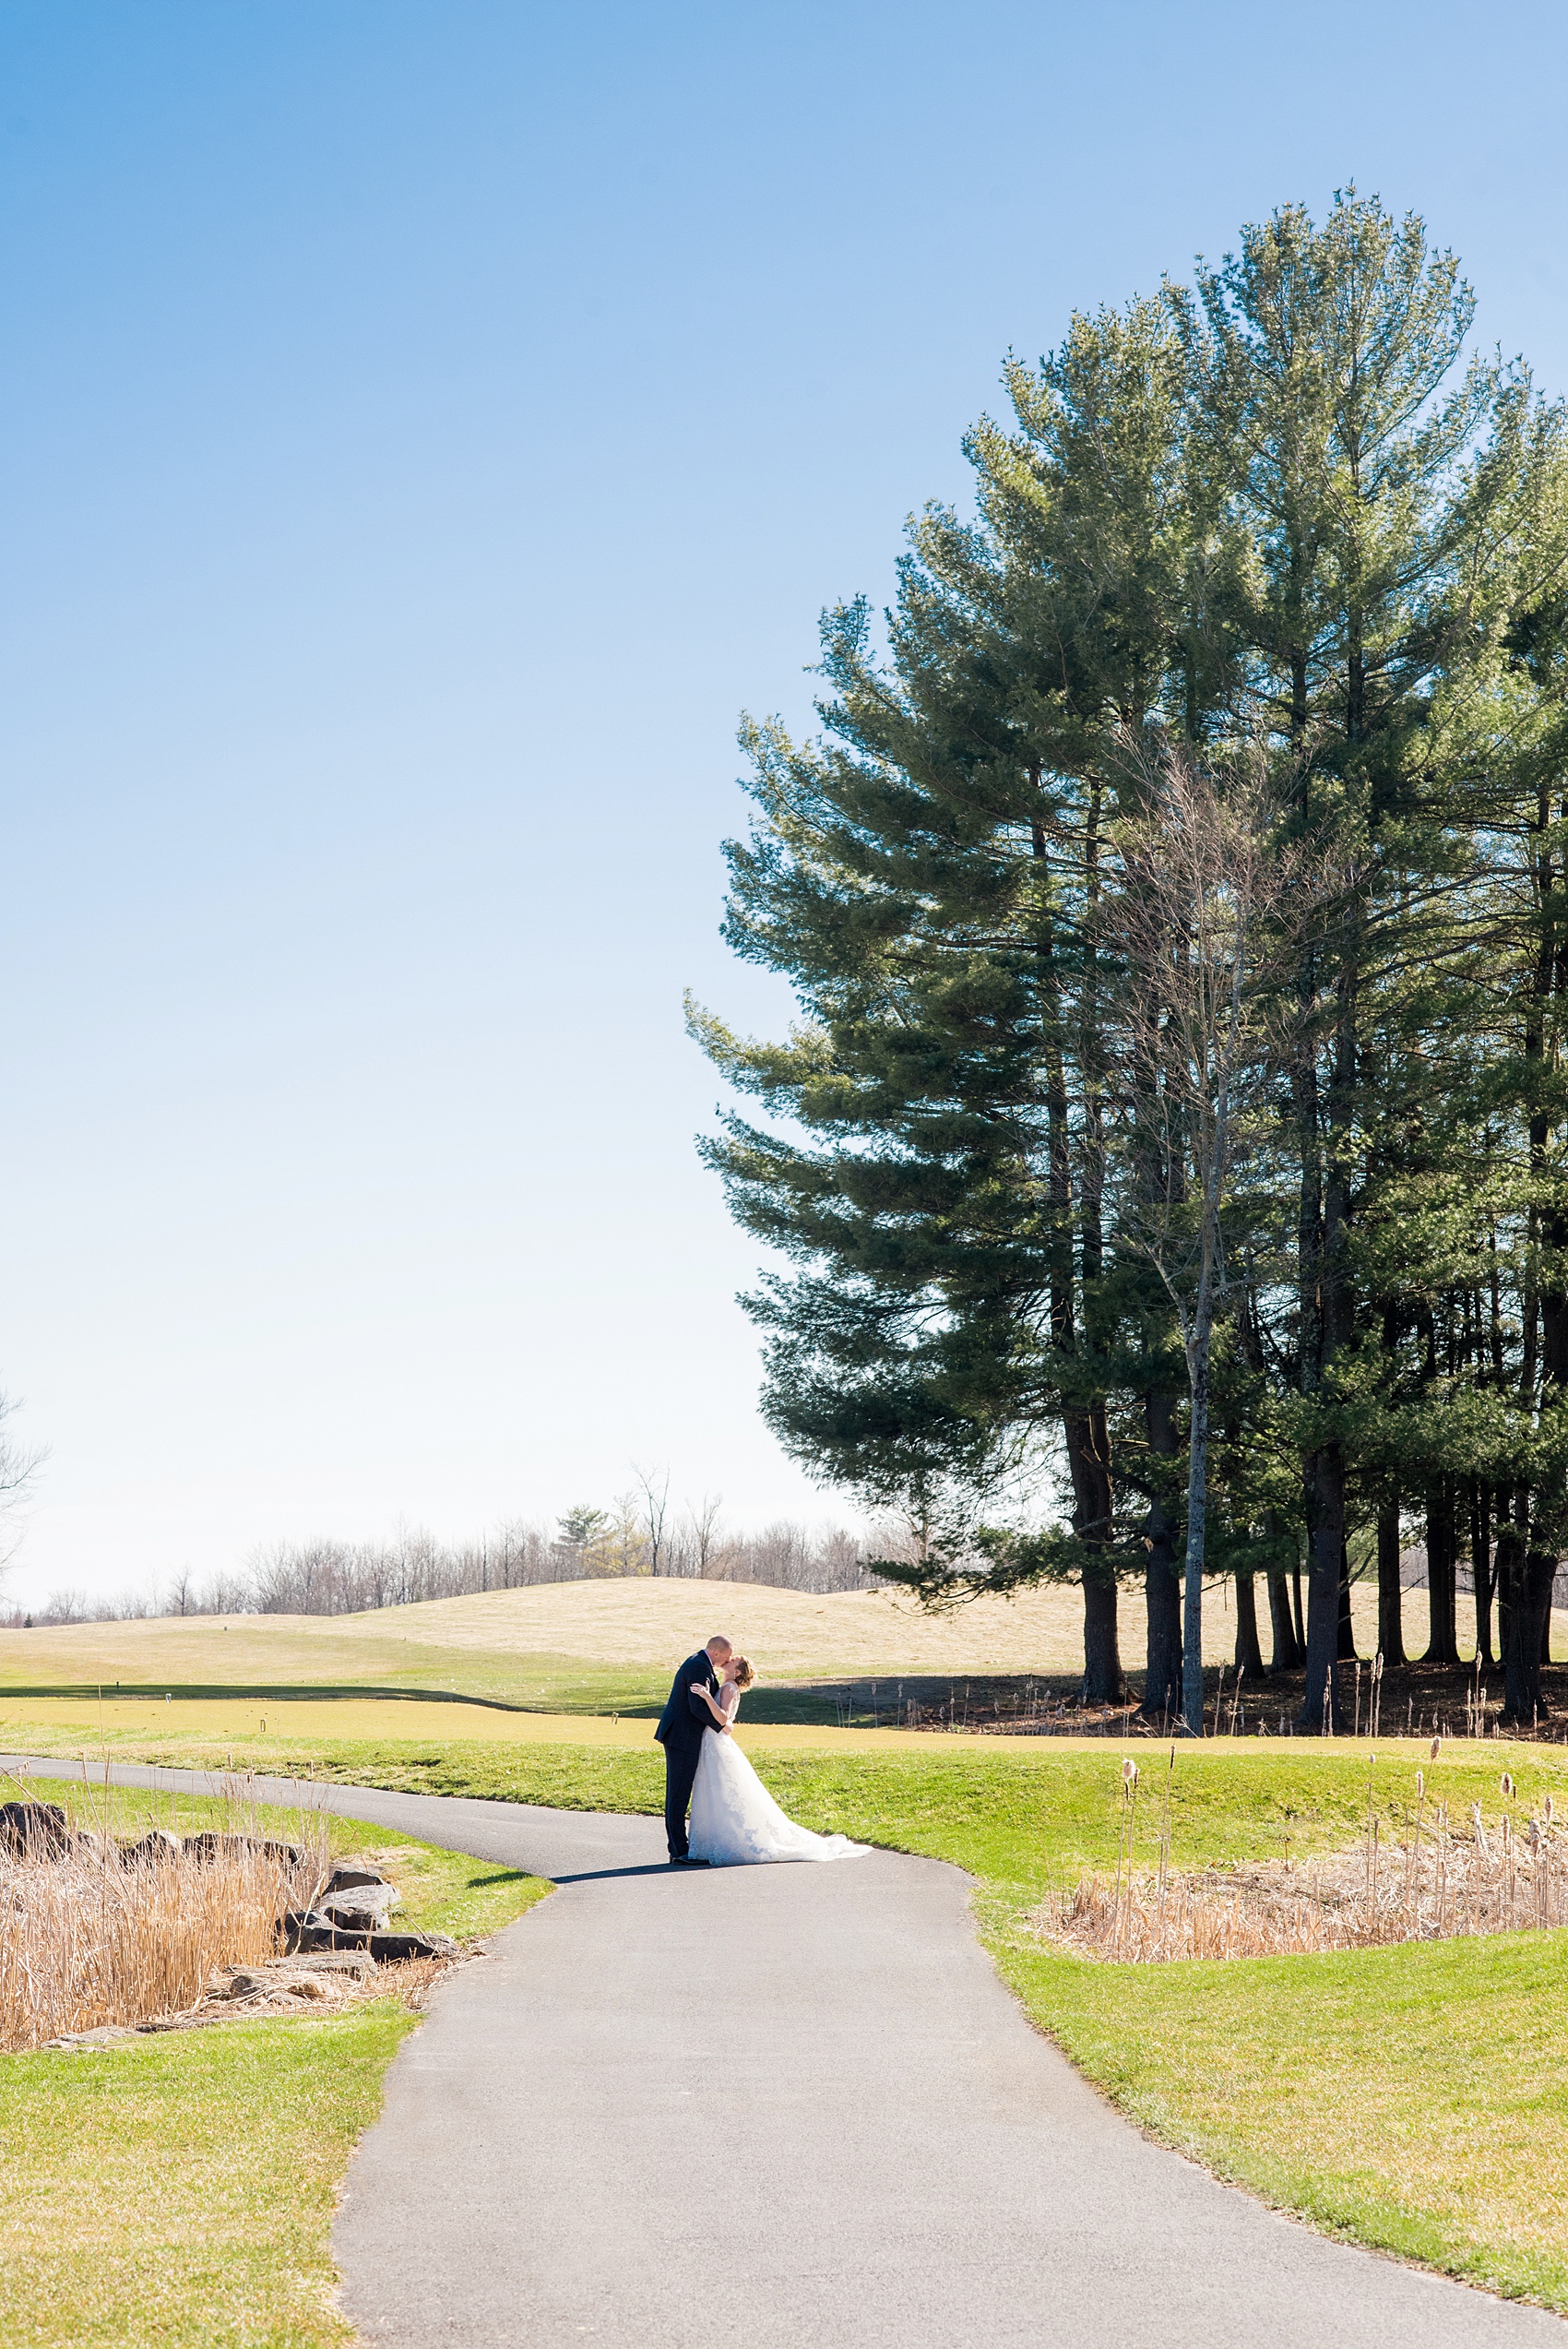 Photos from Saratoga Springs, New York by Mikkel Paige Photography. The bride and groom kiss on the golf course during their spring wedding. #SaratogaSprings #golfcoursewedding #SaratogaSpringsNY #SpringWedding 